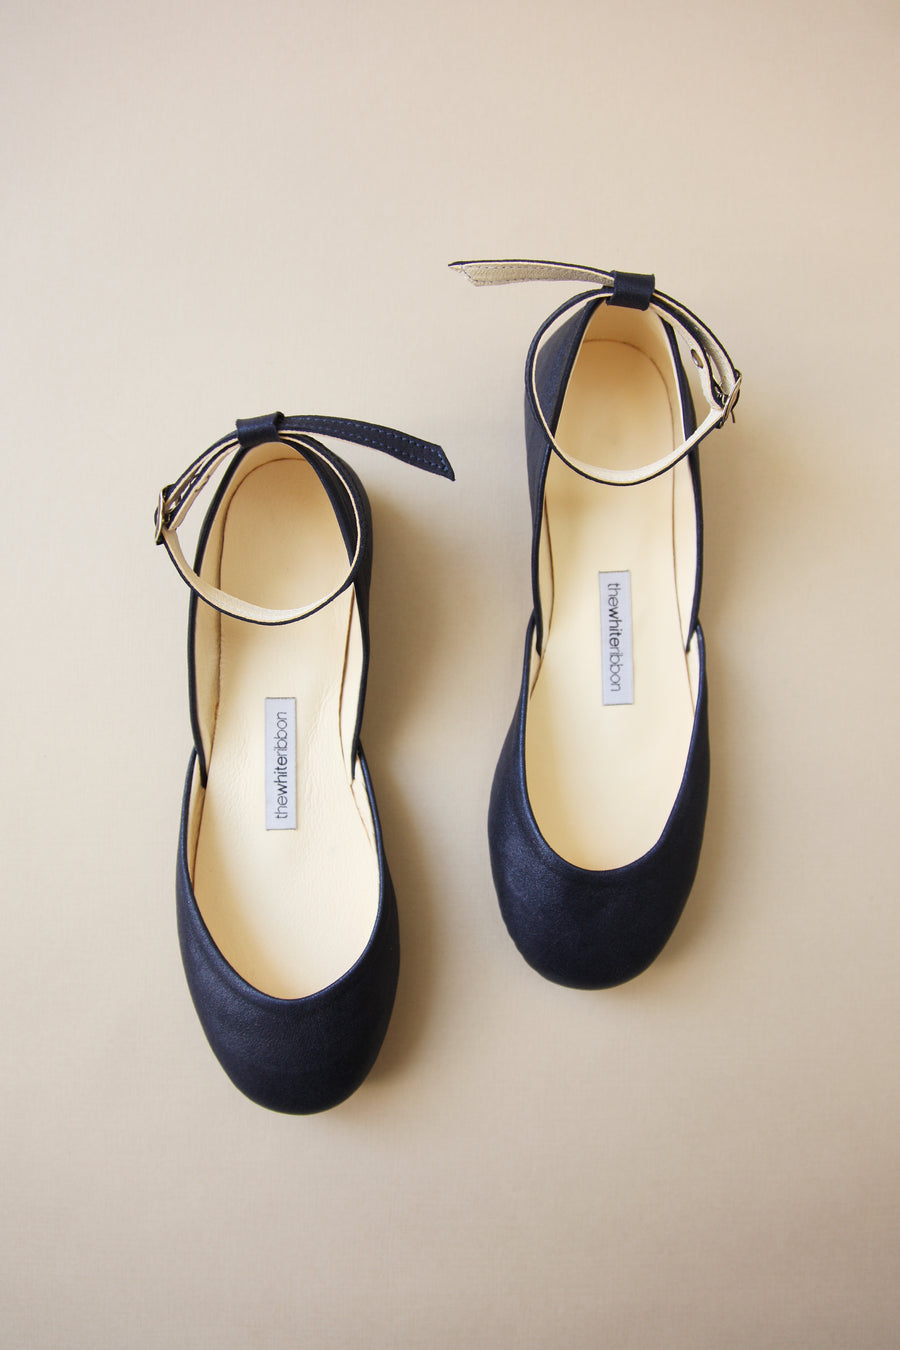 Shiny dark blue ballet flats with buckles